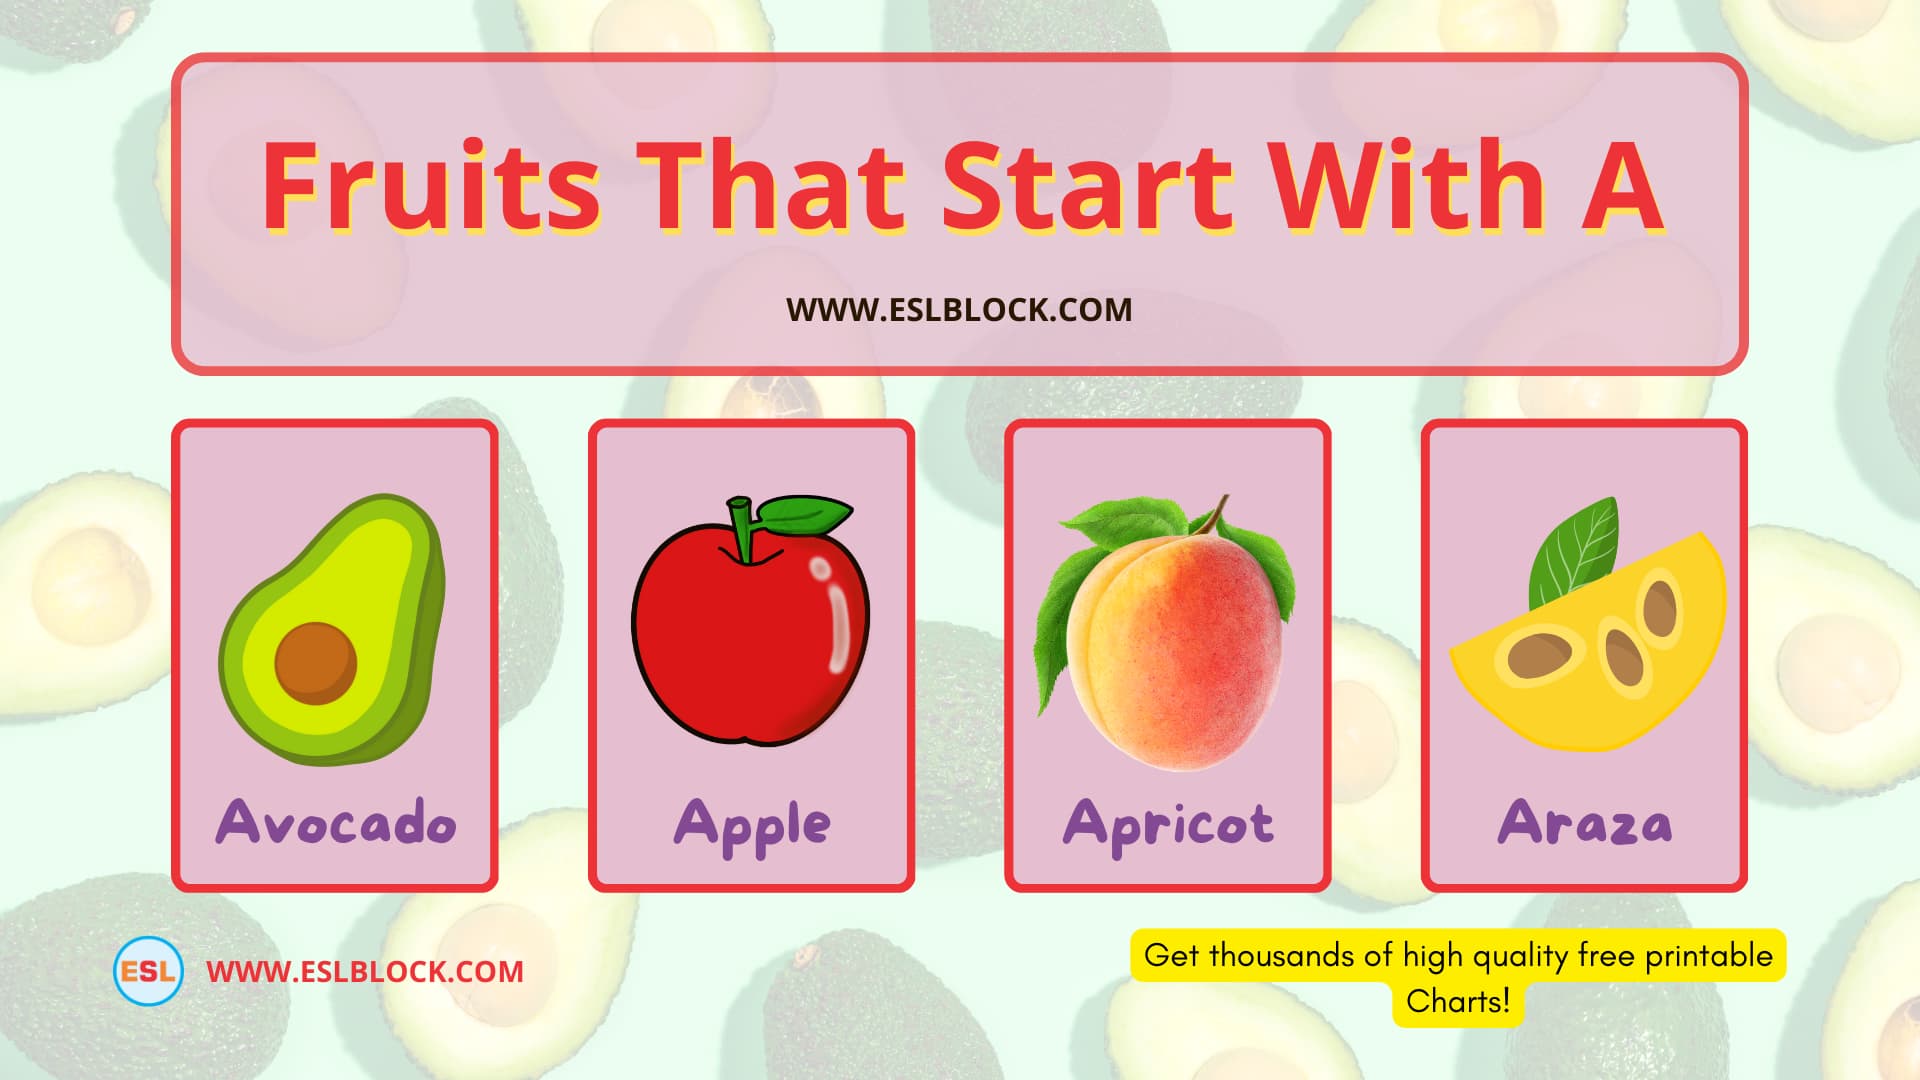 In this article, I will be providing you a list of fruits that start with A in the English language vocabulary.